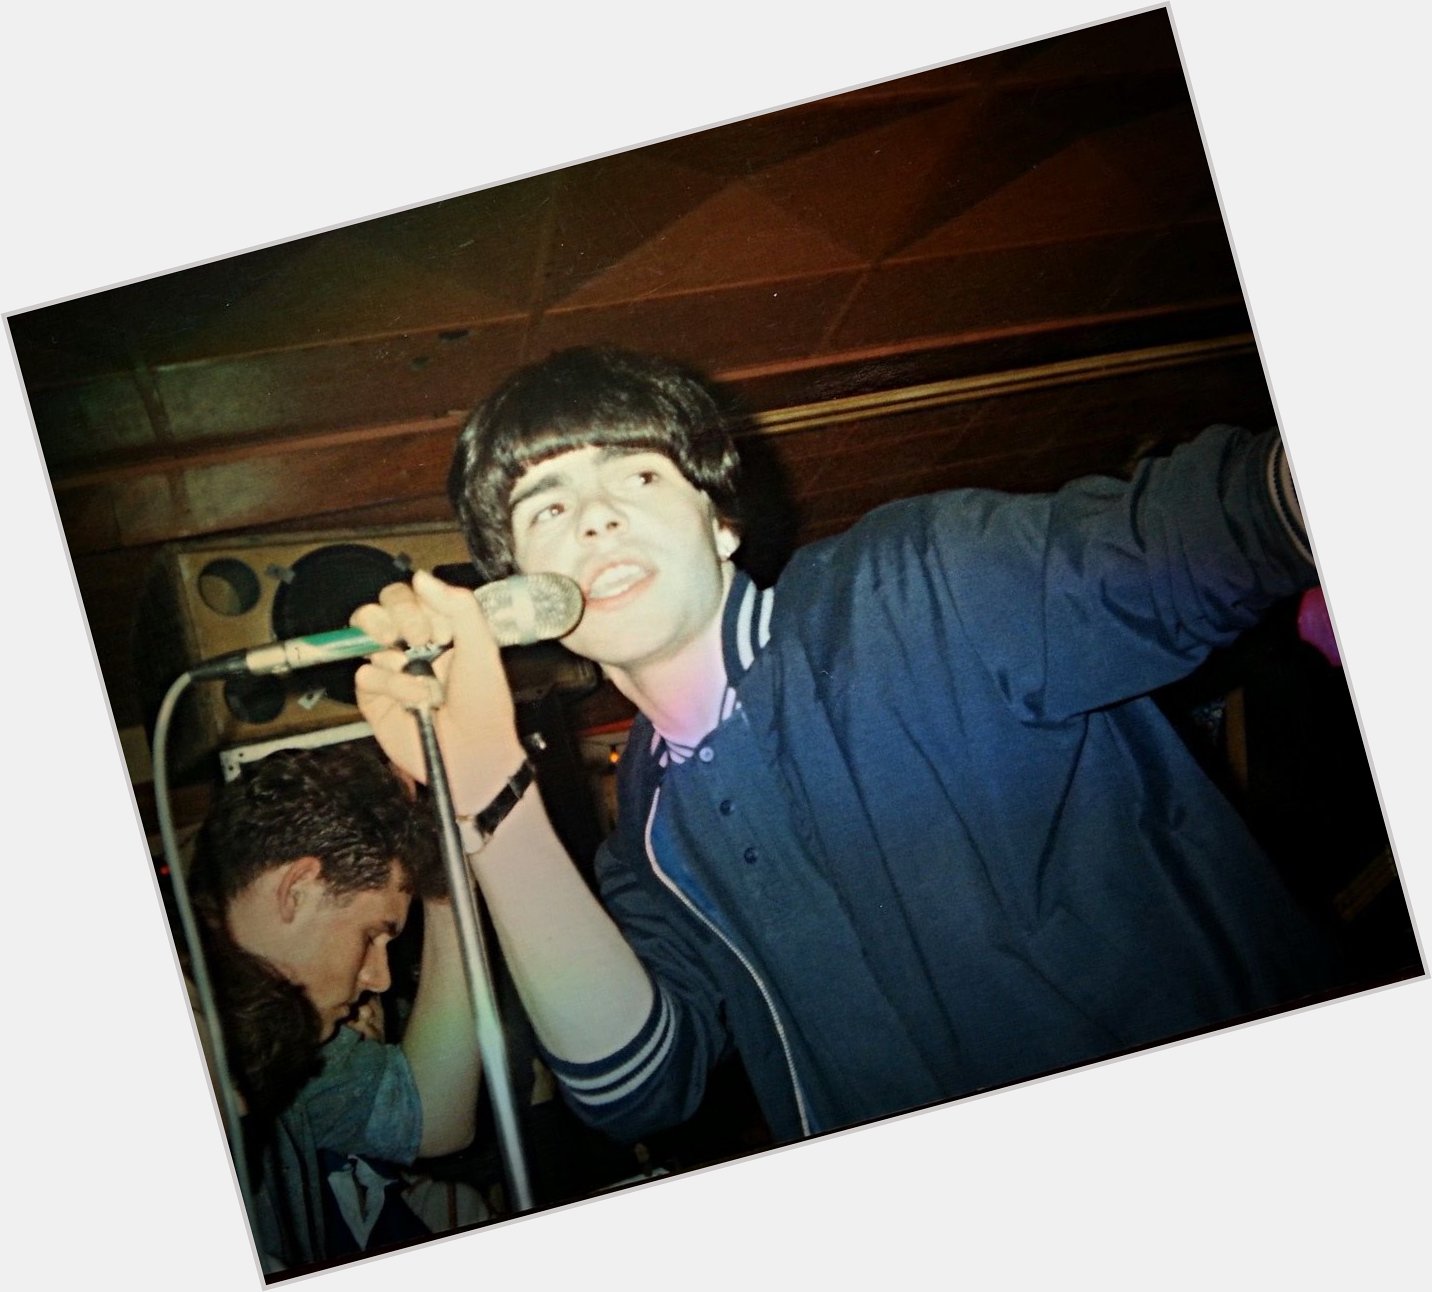 Happy birthday to one of favorite frontmen, The Charlatans Tim Burgess! 